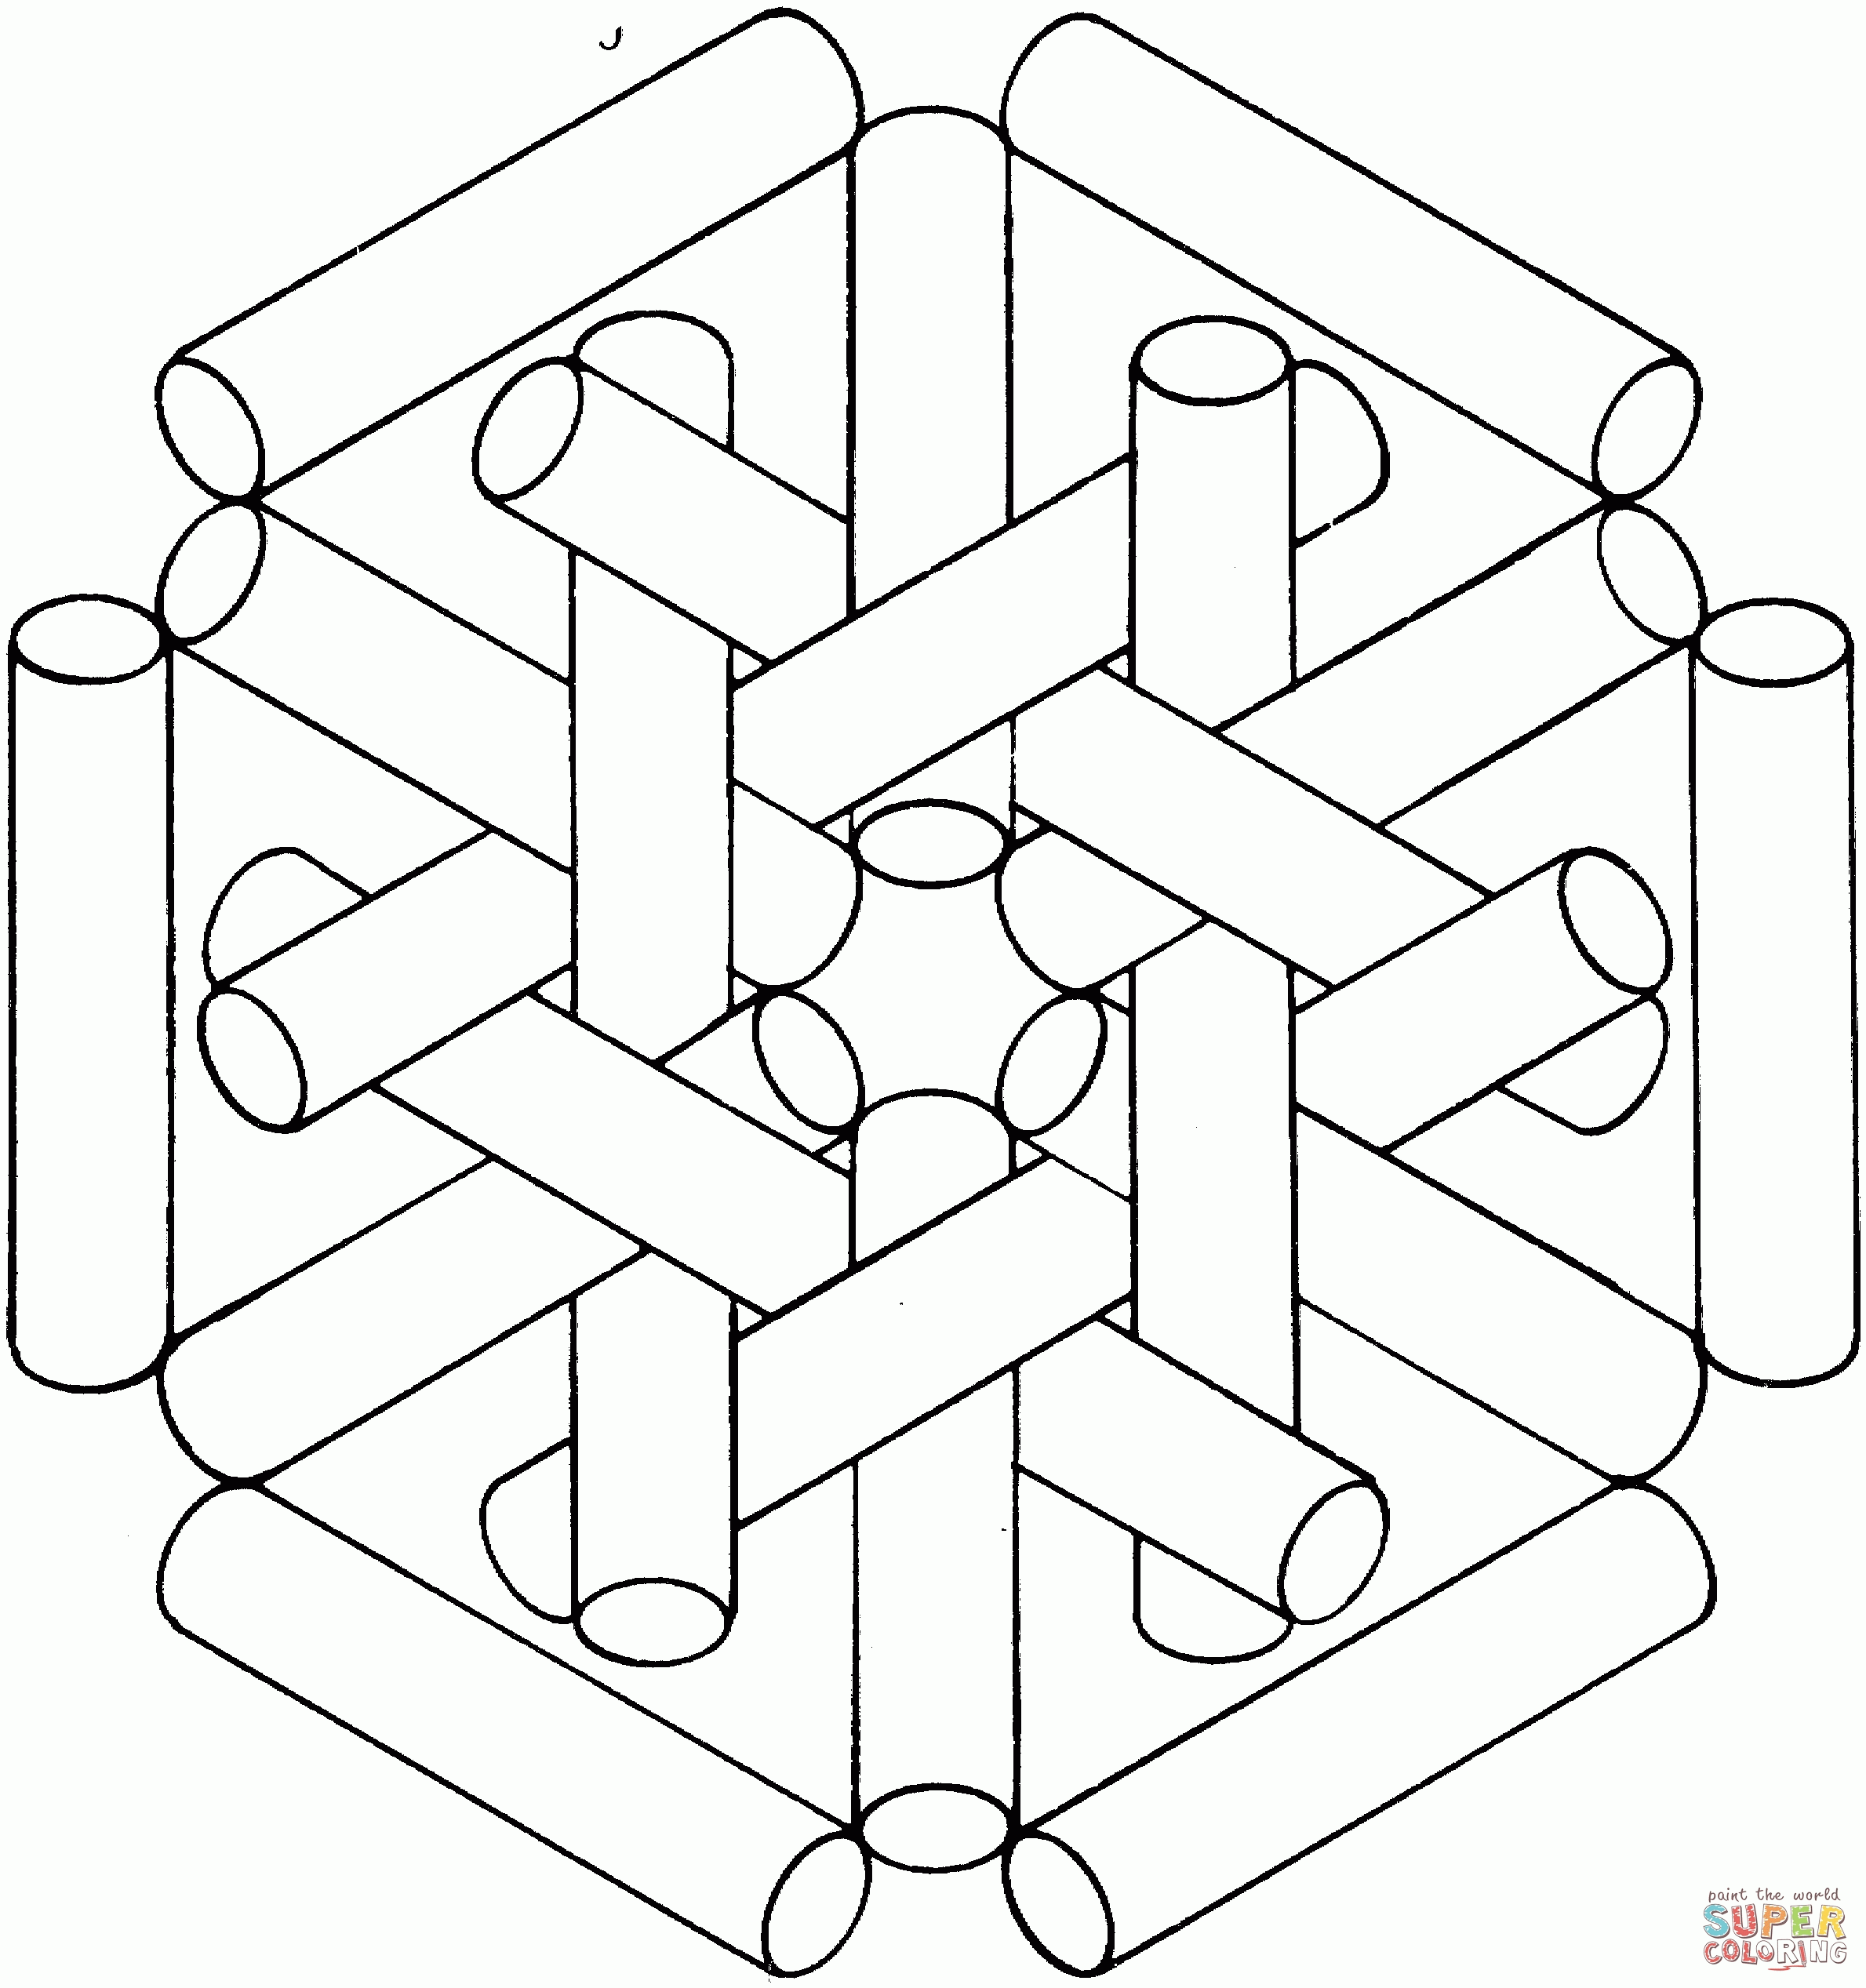 Printables Optical Illusion Coloring Pages 3 - Widetheme